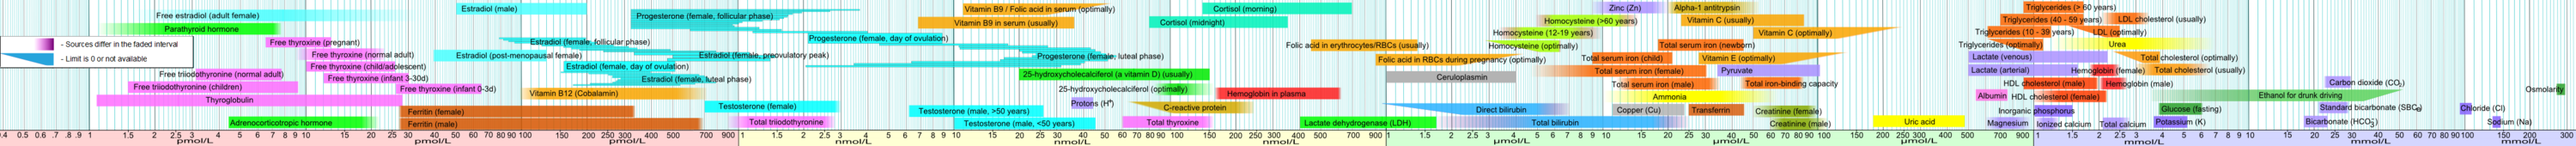 Reference ranges for blood tests - by molarity.png